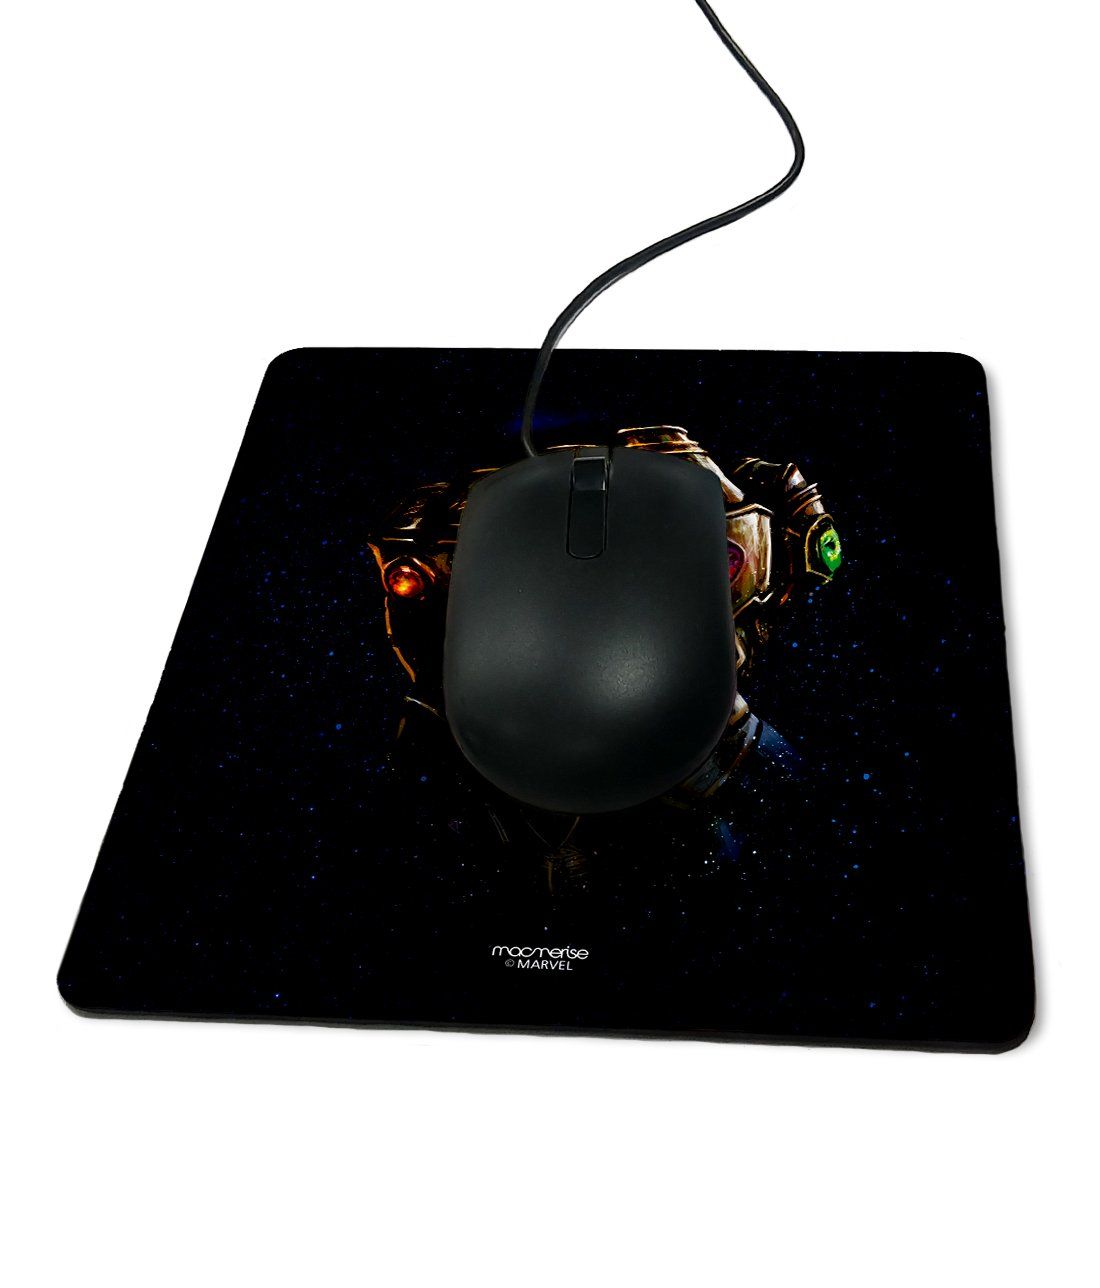 The Gauntlet Punch - Macmerise Mouse Pad